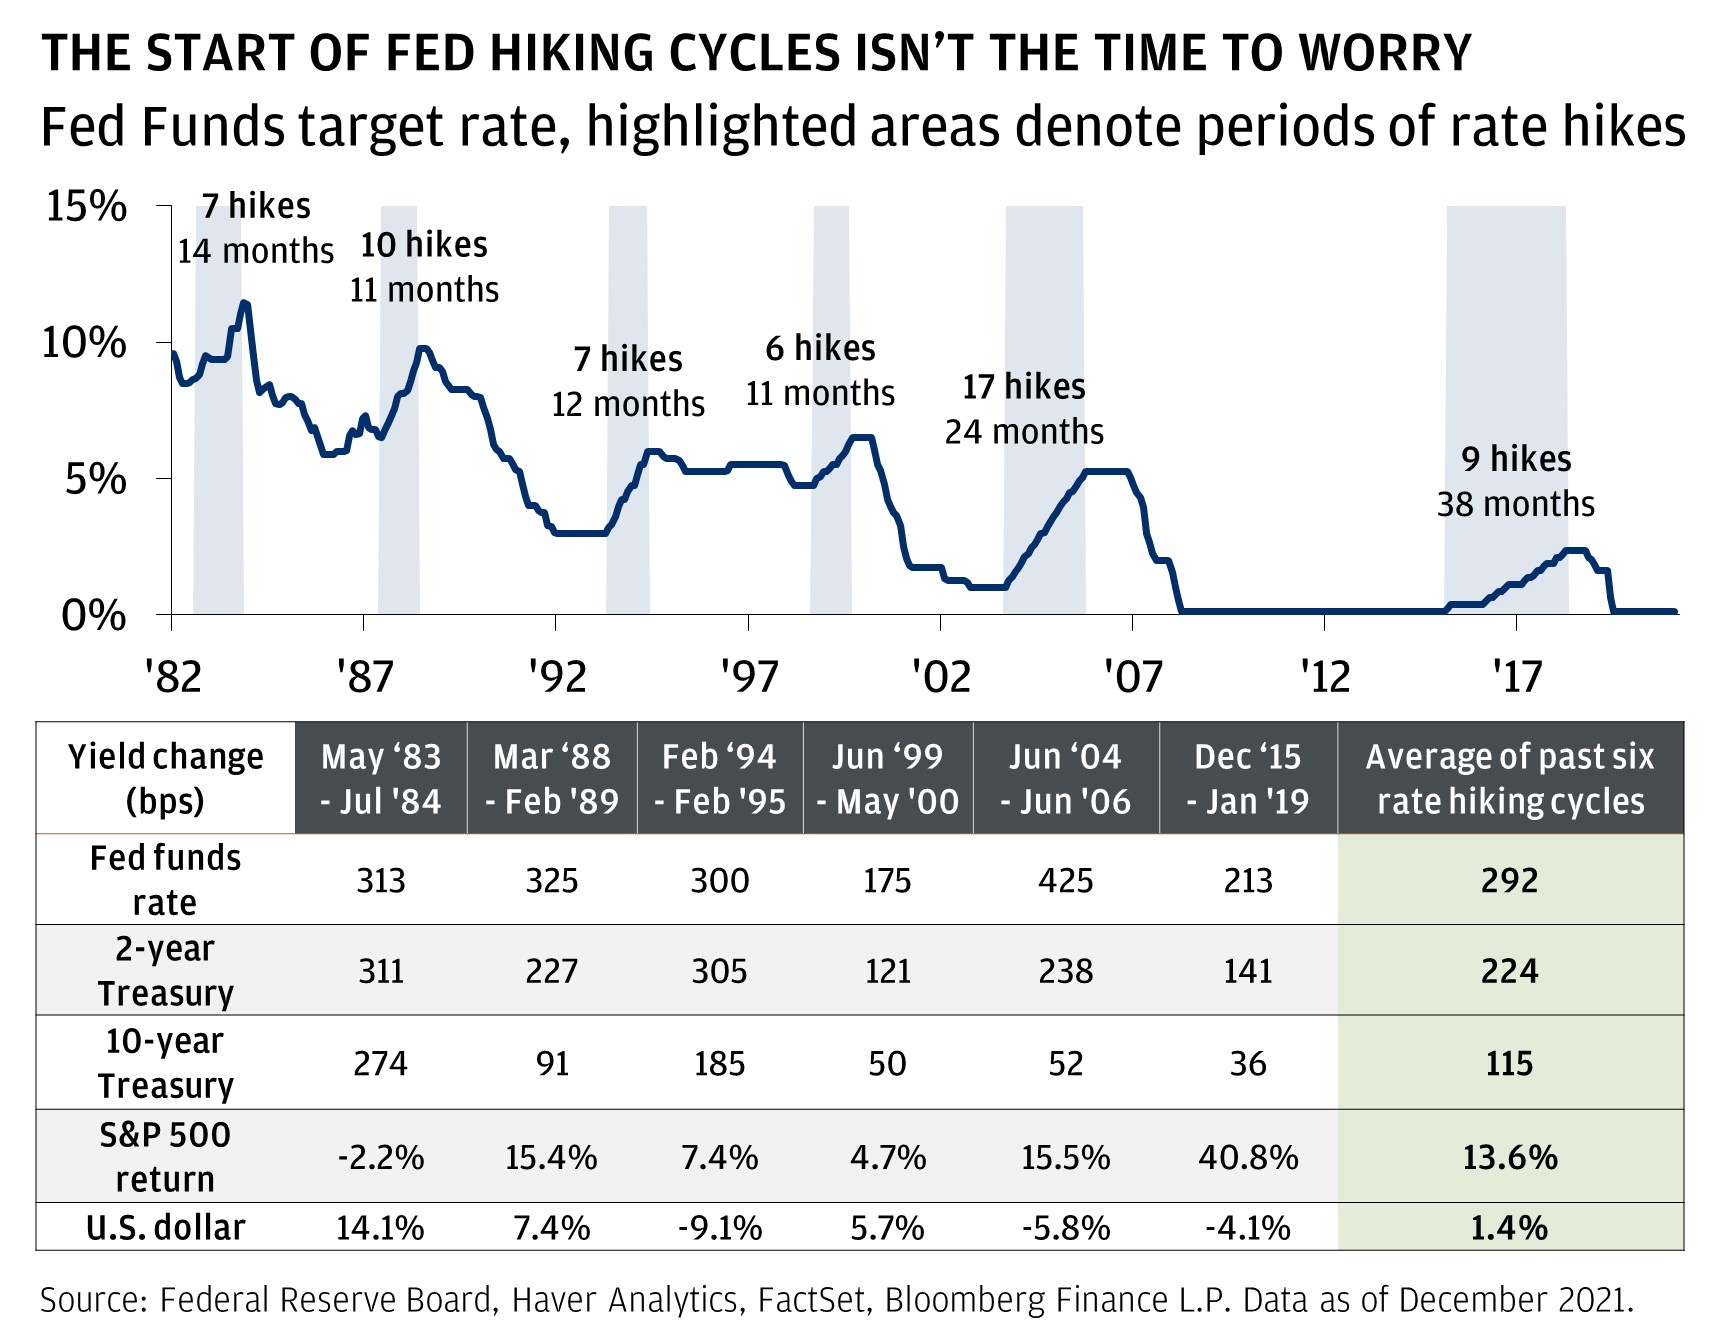 The Start of Fed Hiking Cycles Isn't the Time to Worry